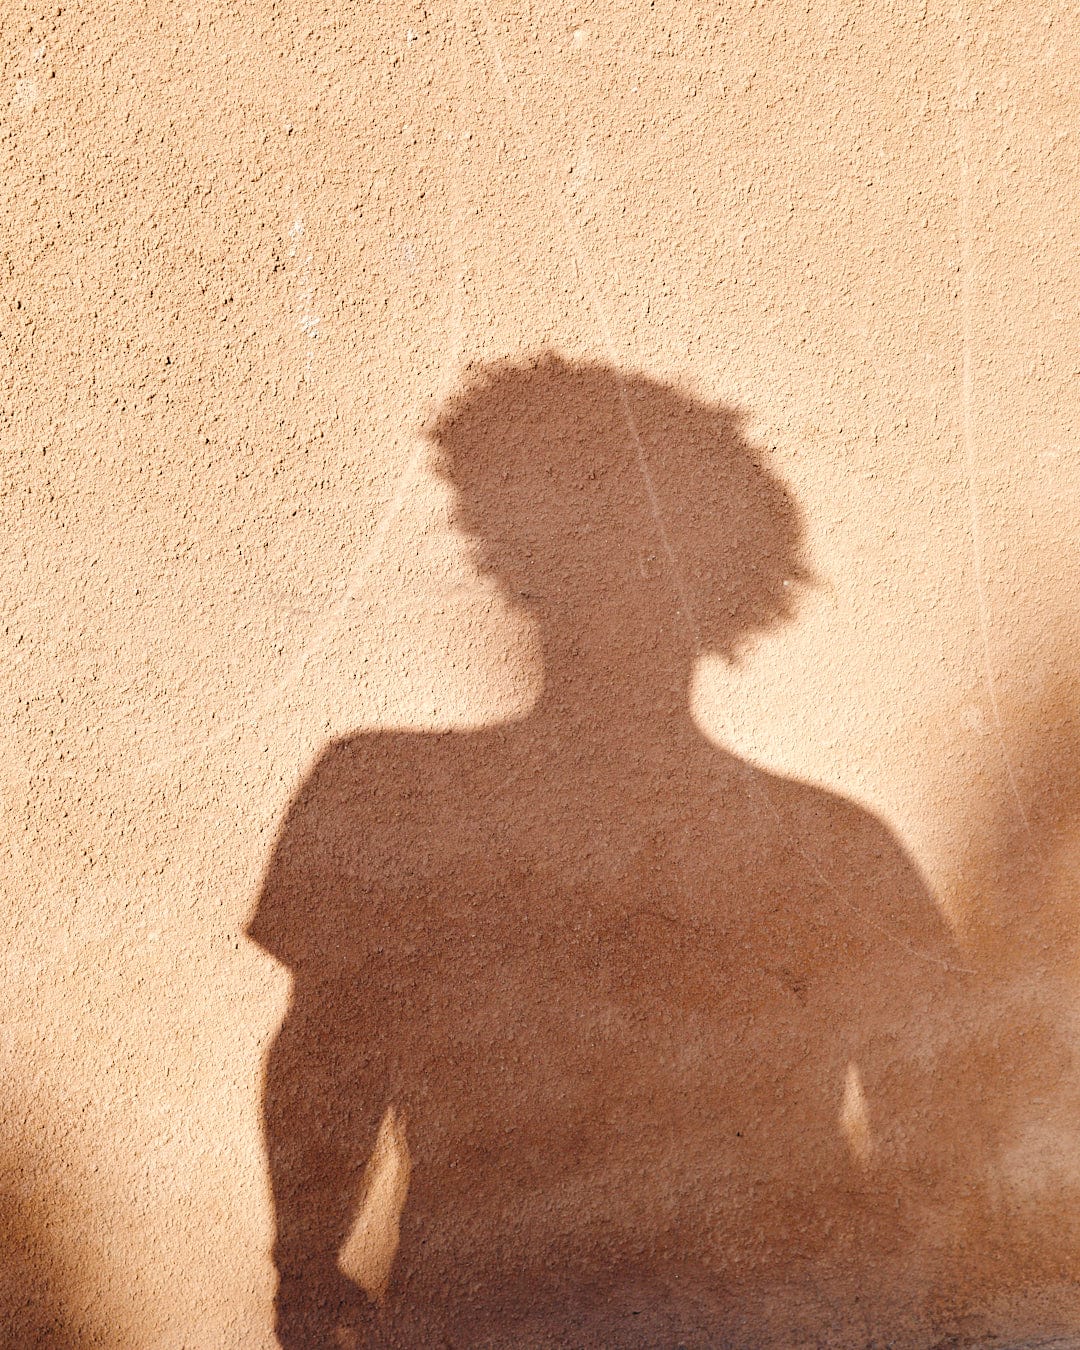 Shadow of a person with curly hair wearing a Saltrock Lost Ships Short Sleeve T-Shirt - White projected on a textured orange wall.